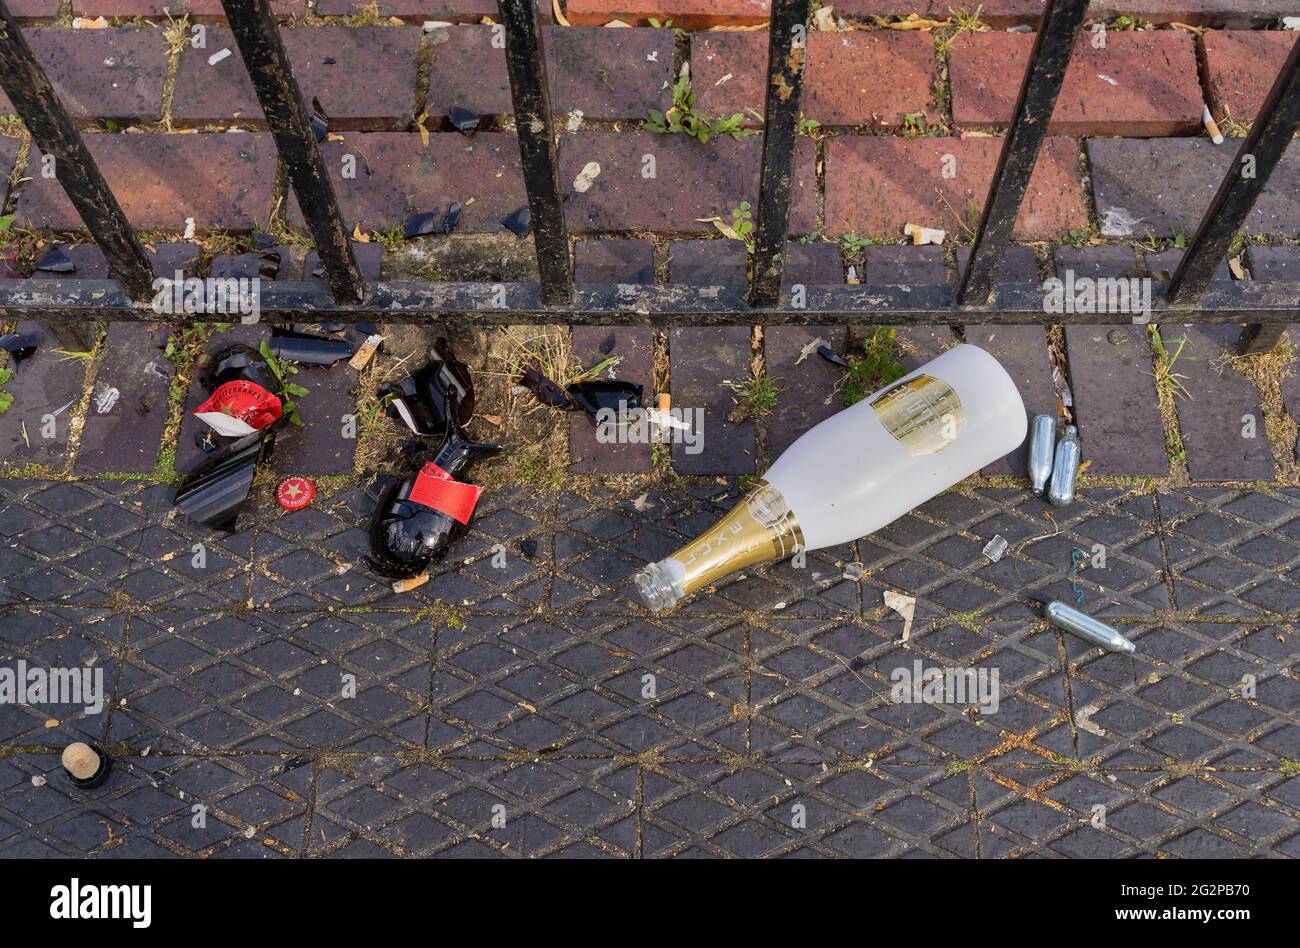 Broken beer bottle, champaign bottle and metal Nitrous oxide laughing gas cannisters on the pavement next to a metal fence. London - 12th June 2021 Stock Photo